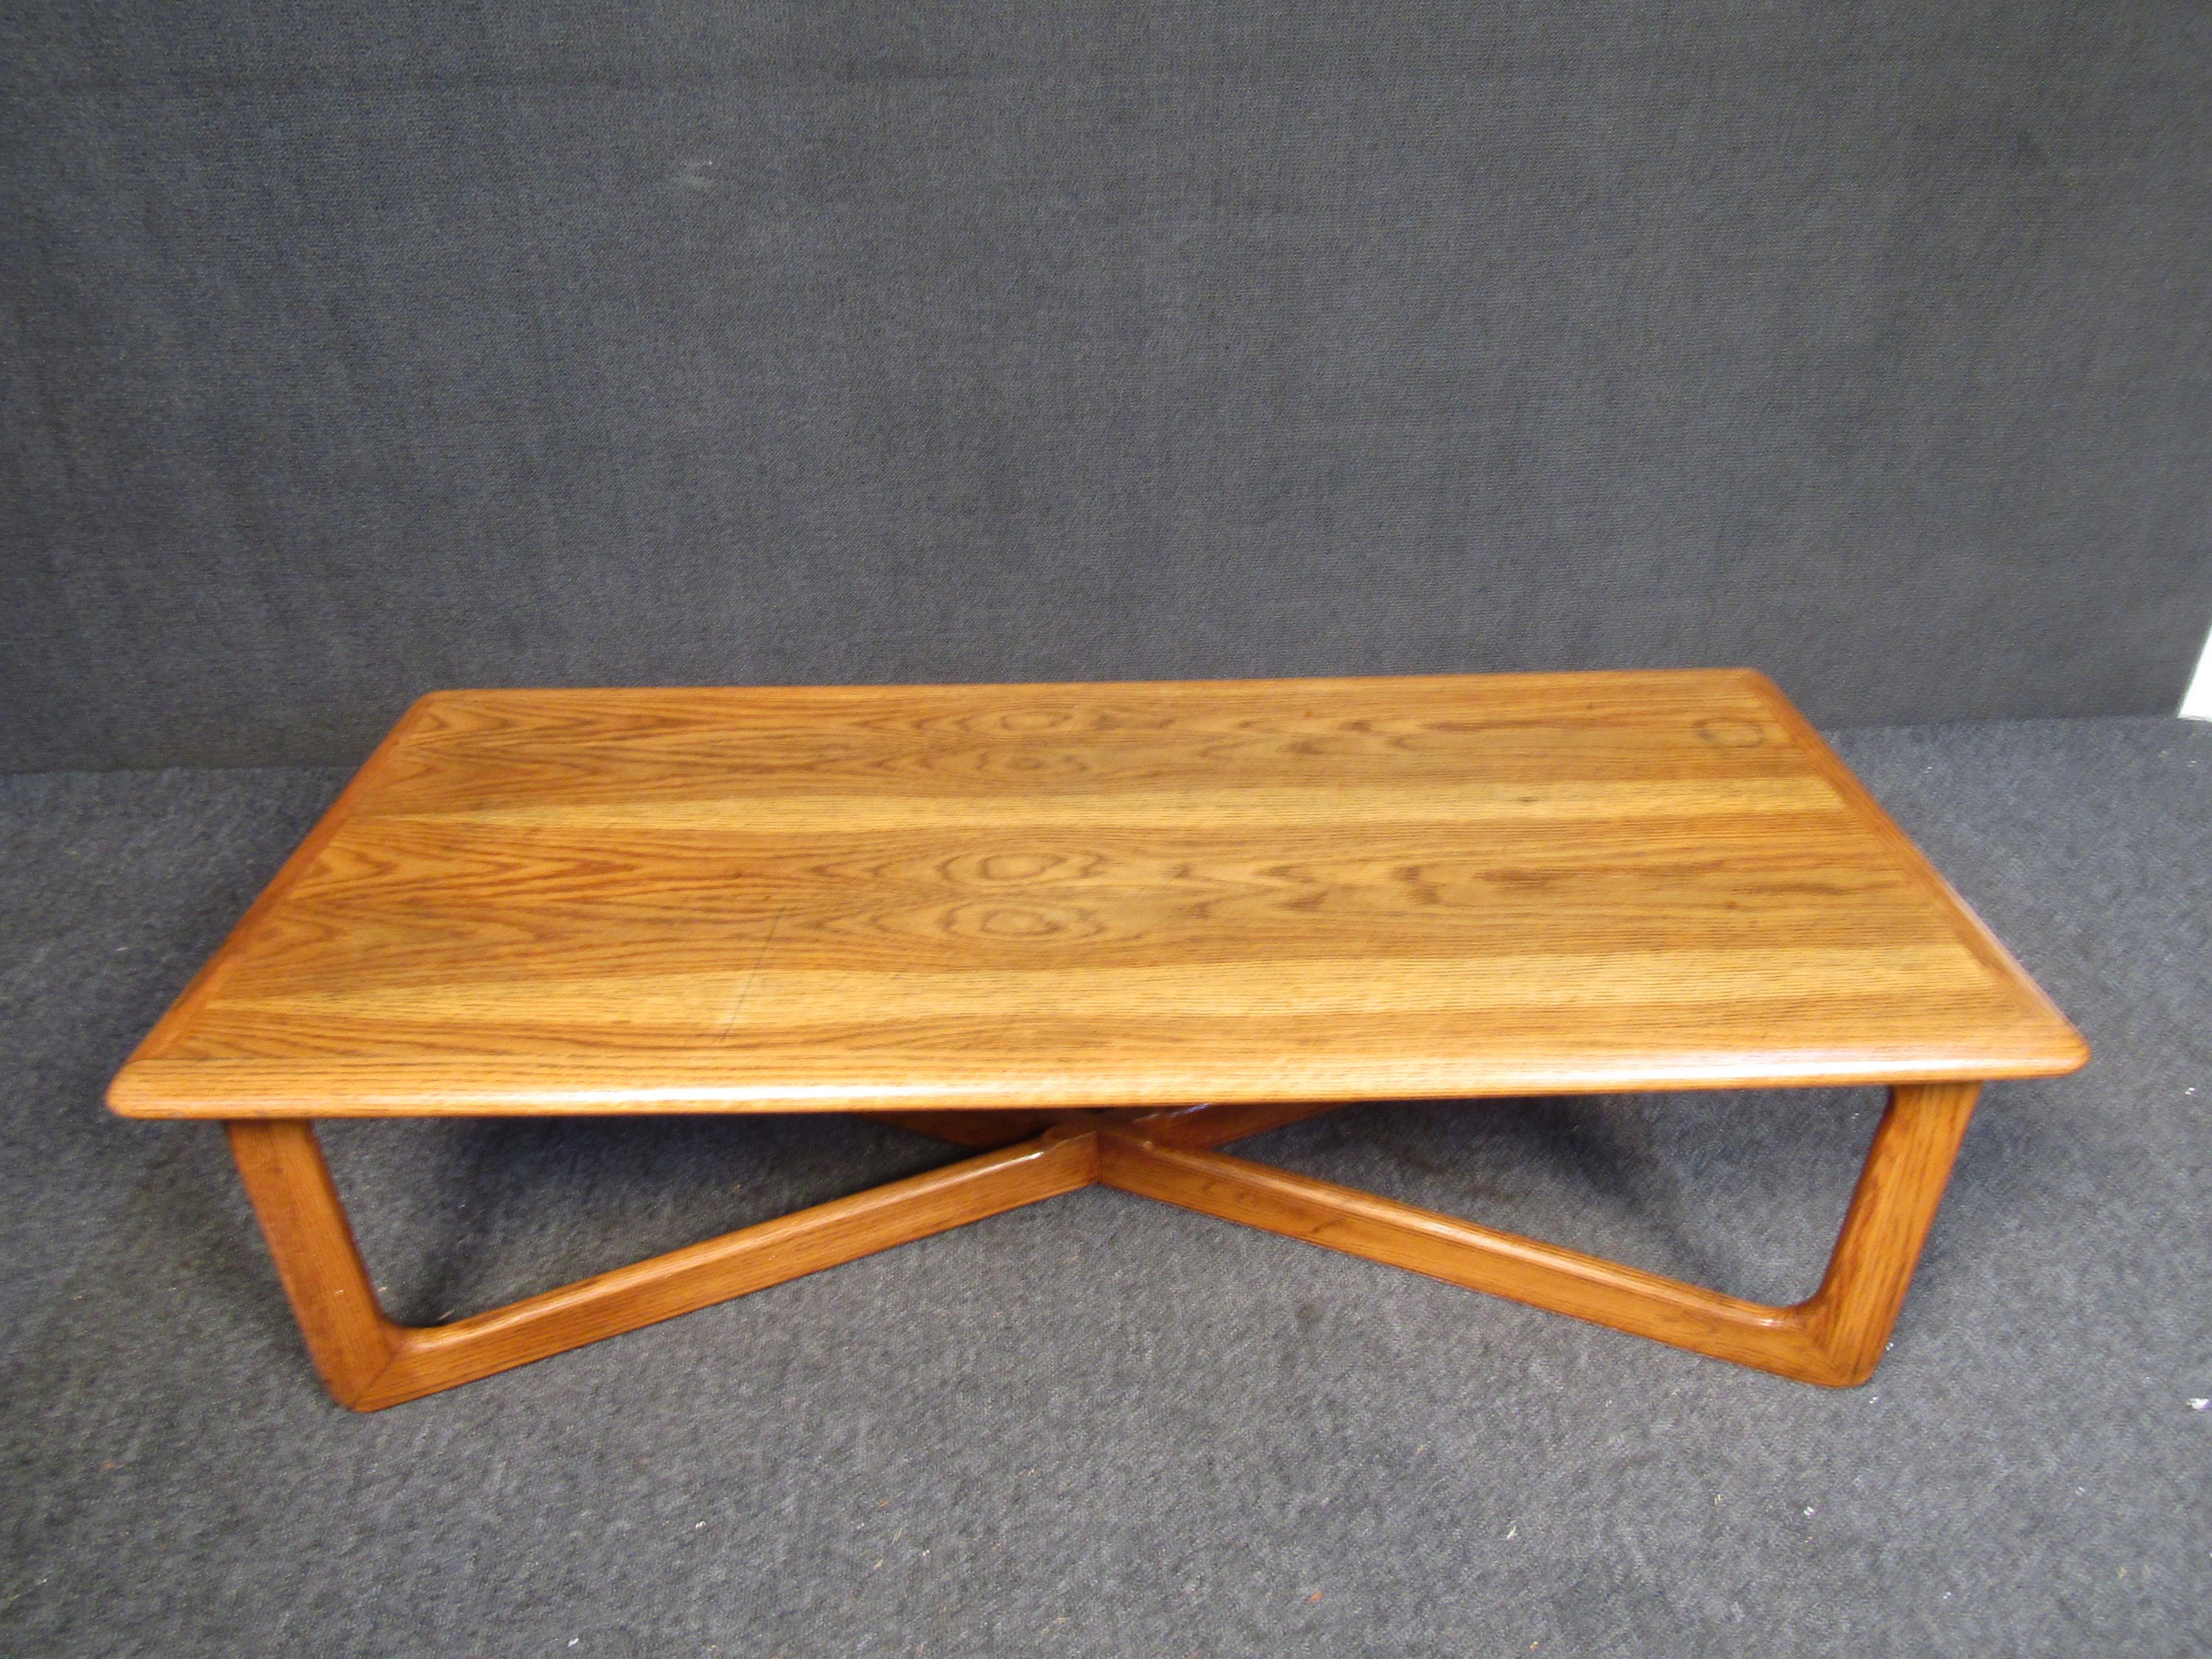 Mid-Century Modern walnut coffee table with an X base and rounded edges. Well constructed and retains the branding mark to the bottom, manufactured by the Lane furniture company. Please confirm item location with seller (NY/NJ).